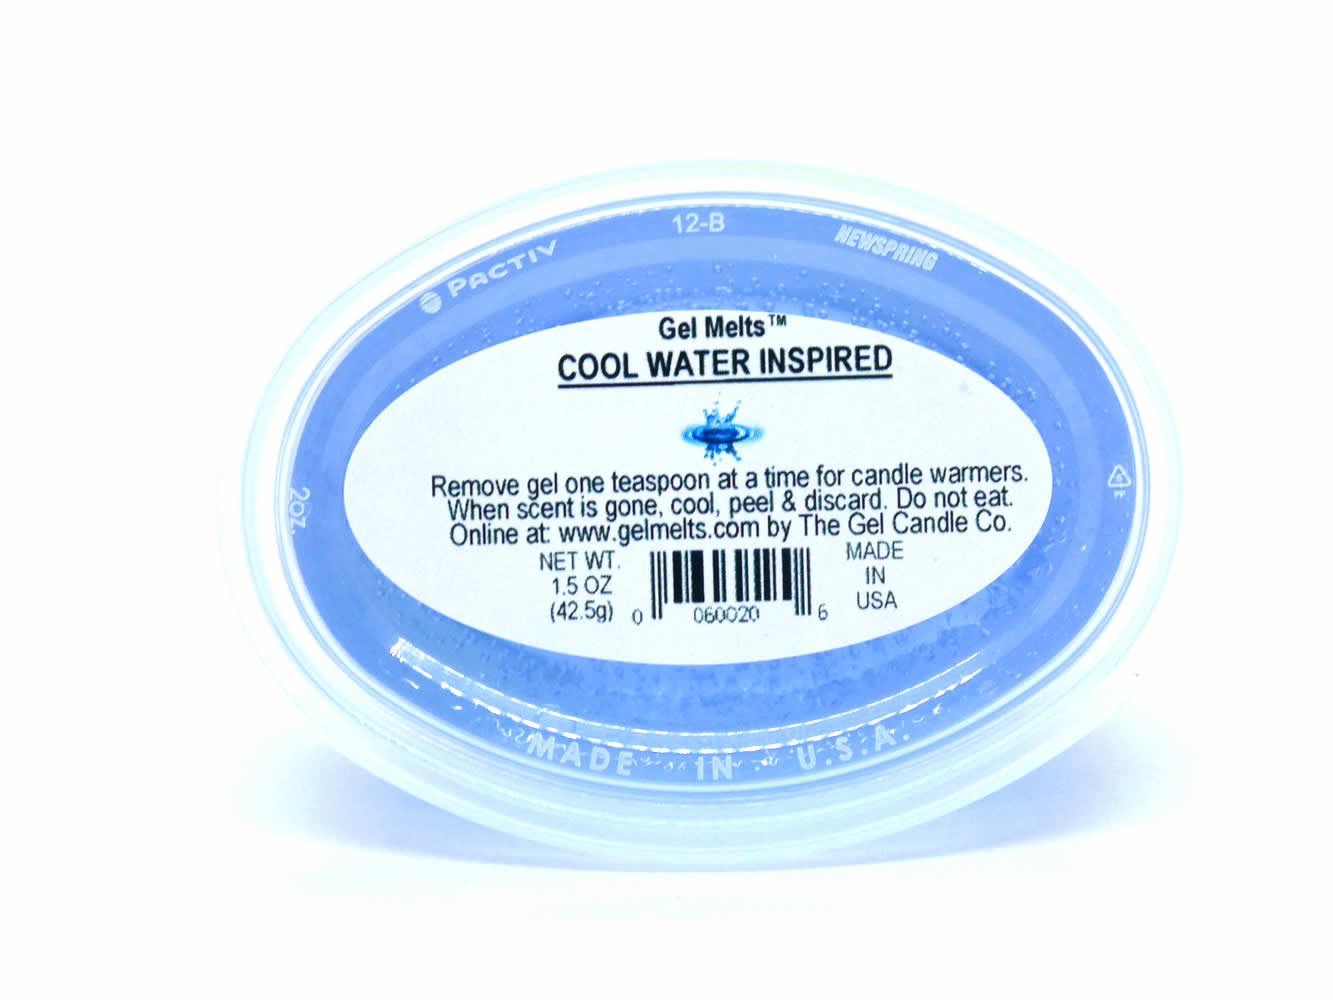 Cool Water Inspired scented Gel Melts™ for warmers - 3 pack